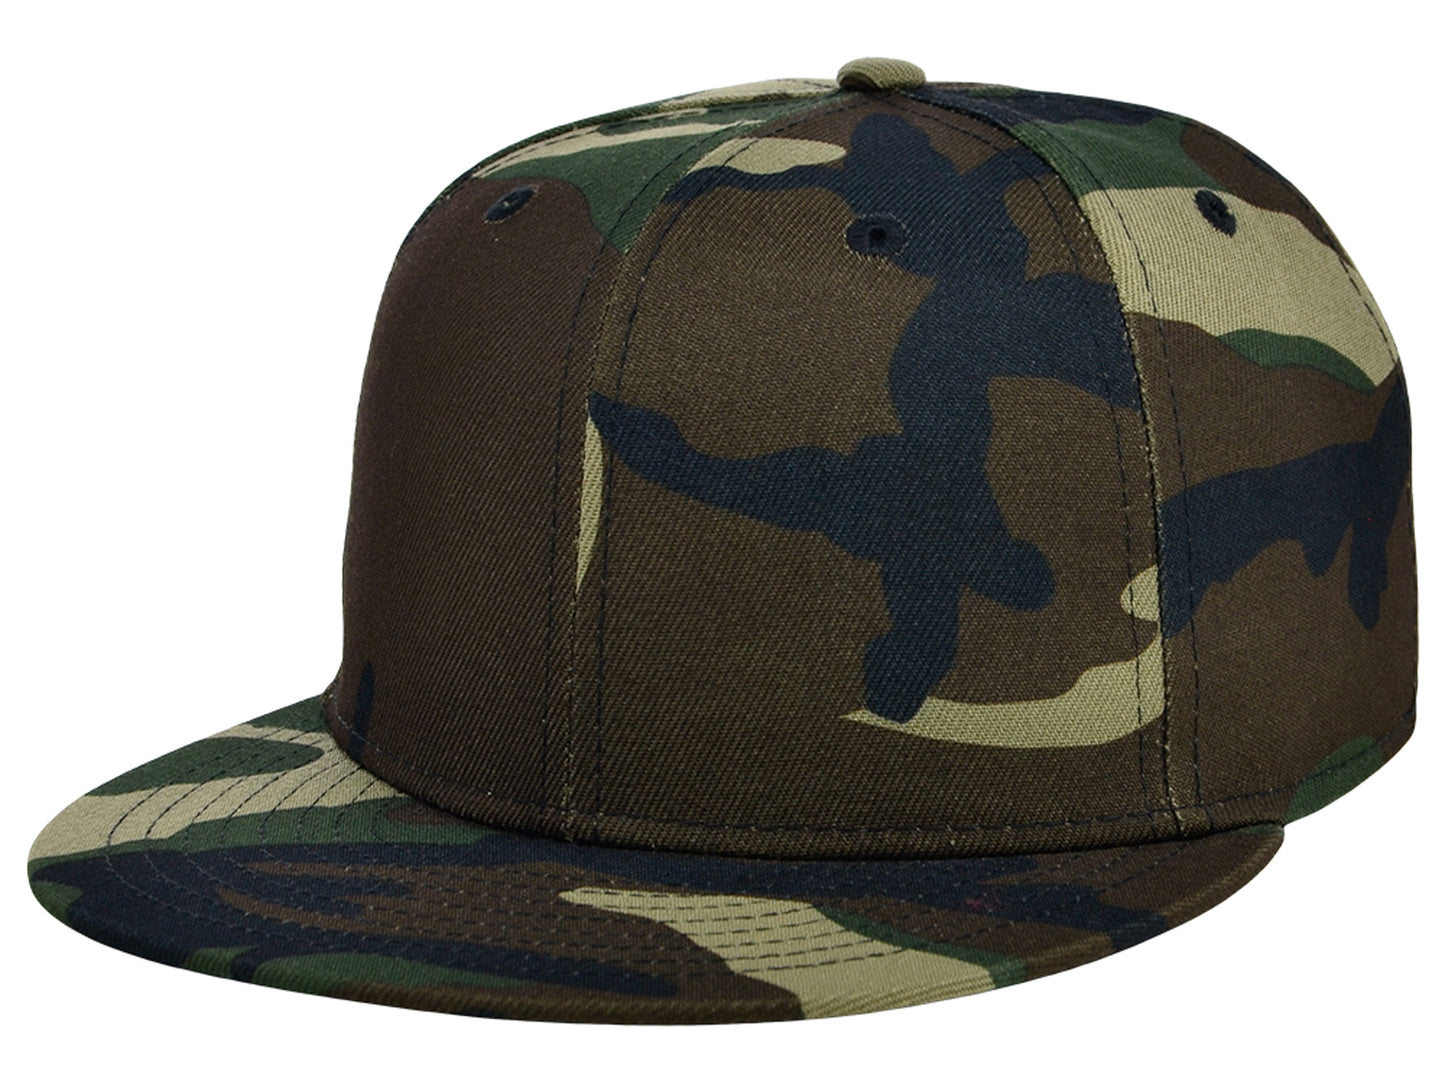 Crowns By Lids Full Court Fitted Cap - Camo